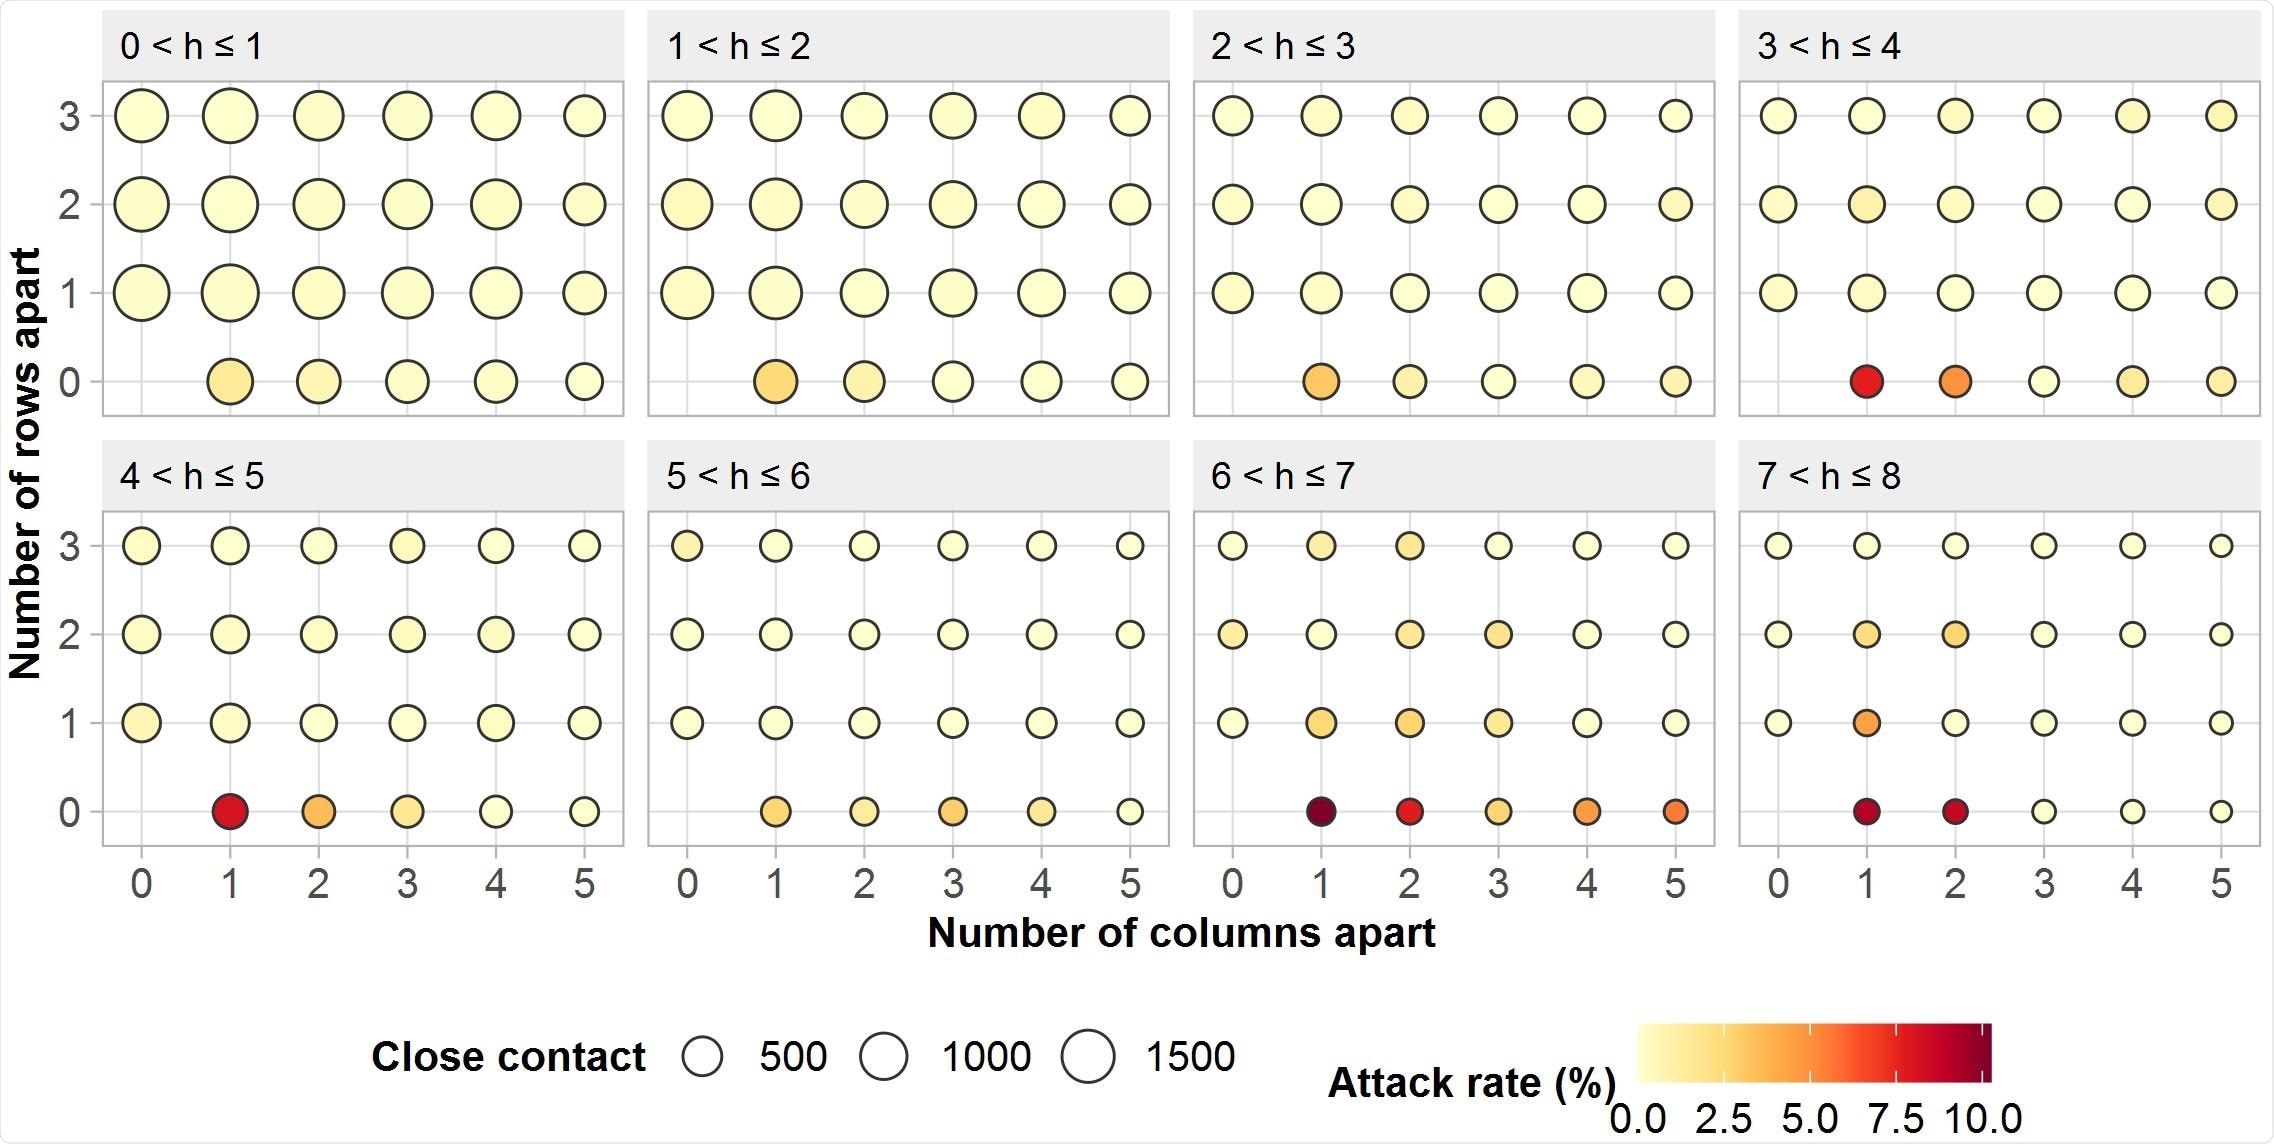 Attack rate of COVID-19 per different seats/co-travel time on train.